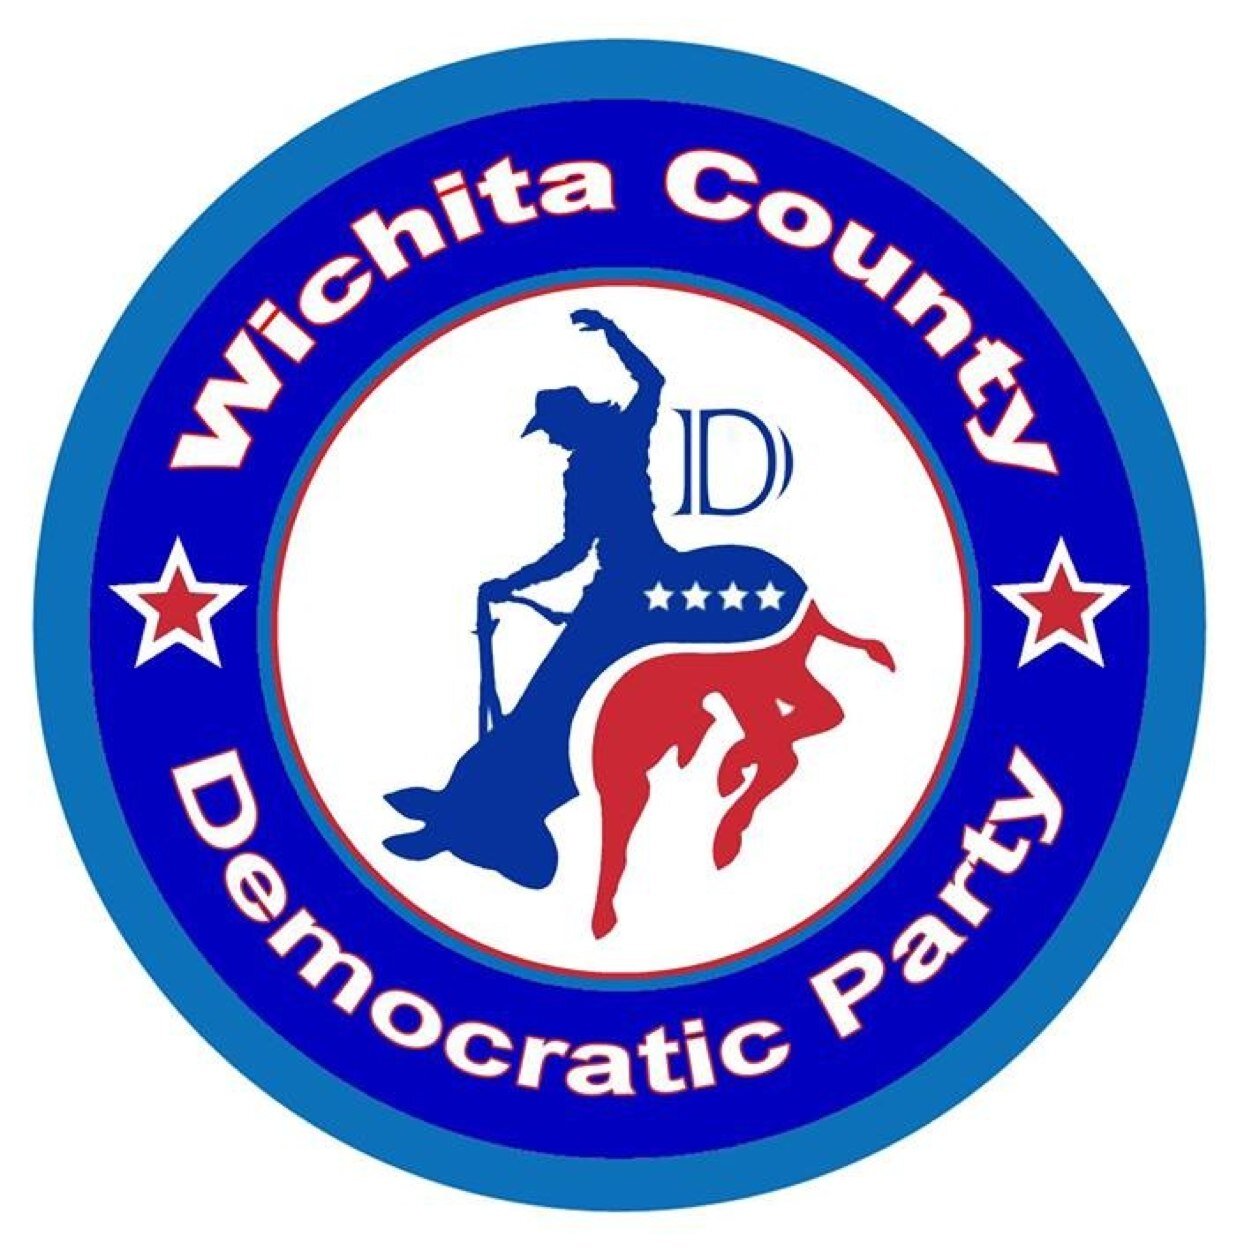 This is the virtual meeting place for the Wichita County Democratic Coalition.